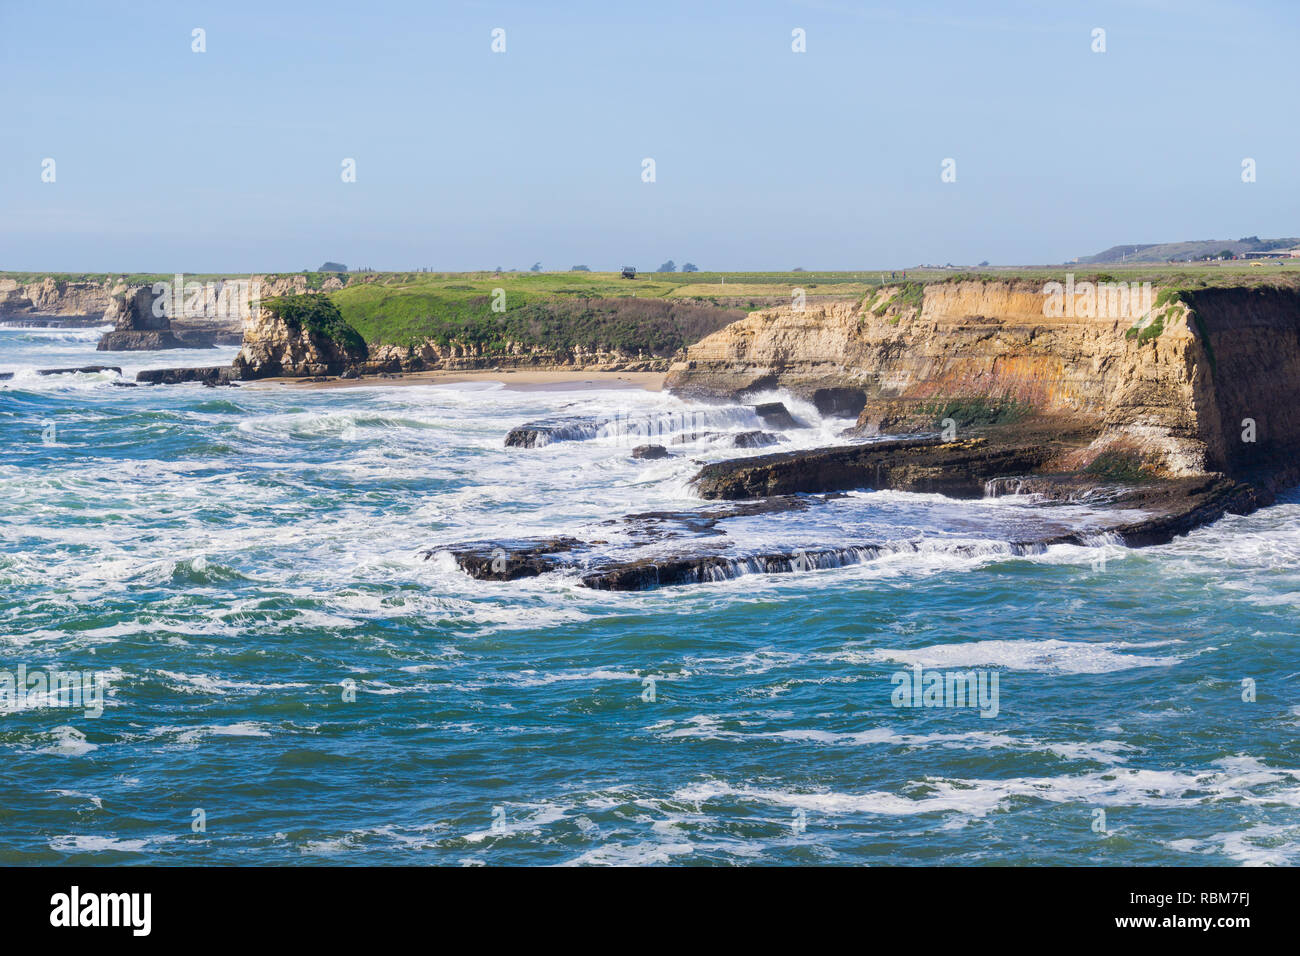 Dramatic landscape of the Pacific Ocean Coast during high tide and strong surf, Wilder Ranch State Park, California Stock Photo